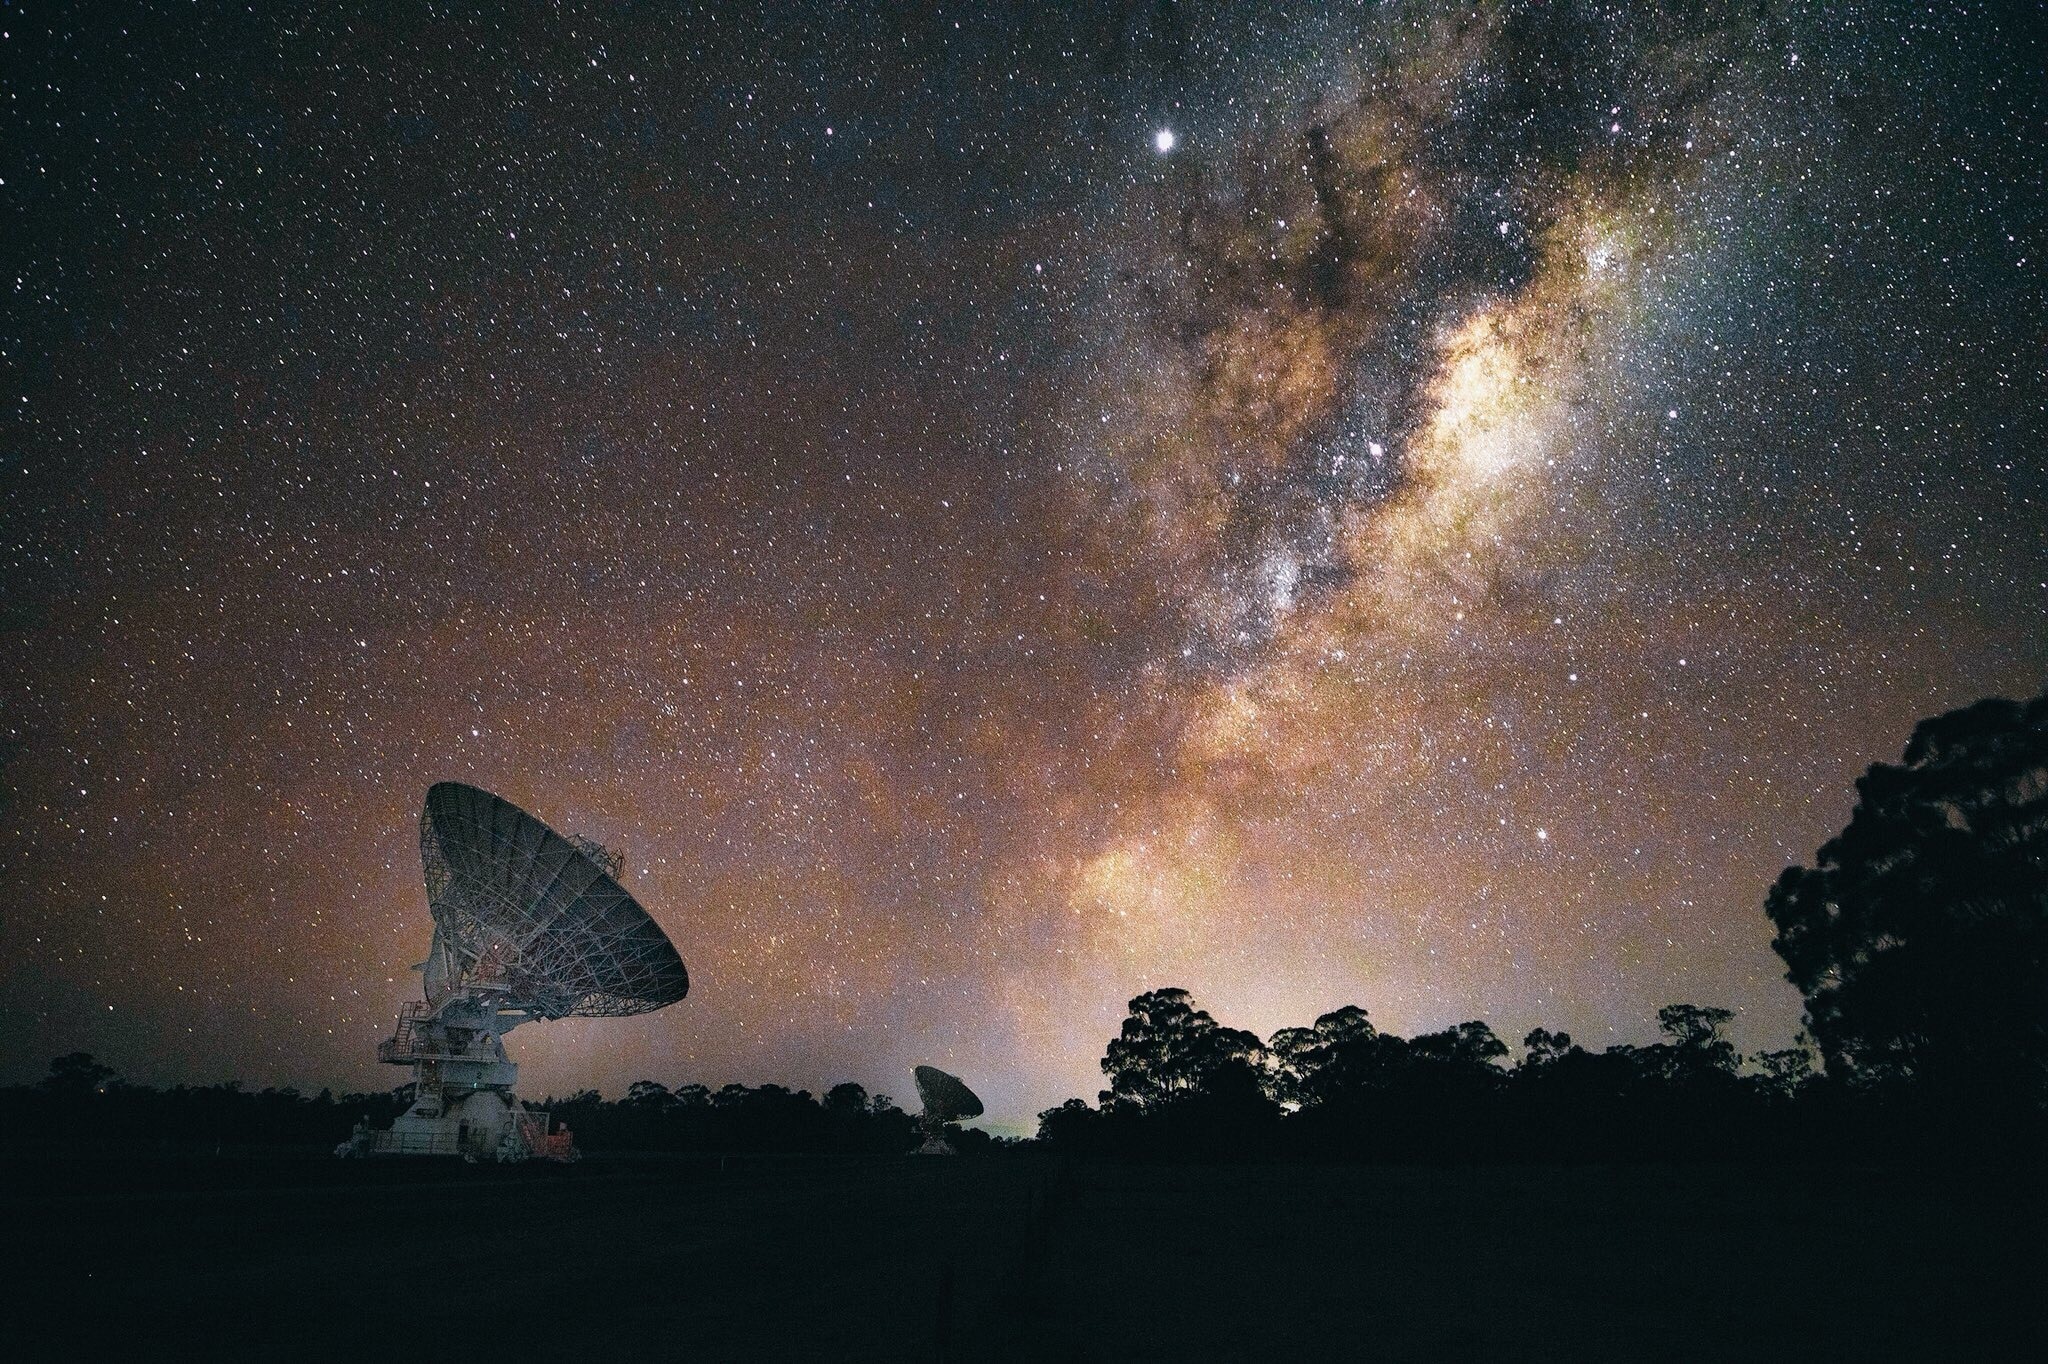 Just outside of Narrabri in NSW, Australia, you’ll find six 22m radio telescopes that explore space.  Looking to the Milky Way you really do have to wonder what is out there.  The stars are magic and I could watch them forever. #astrophotography #milkyway #stargazing #nature